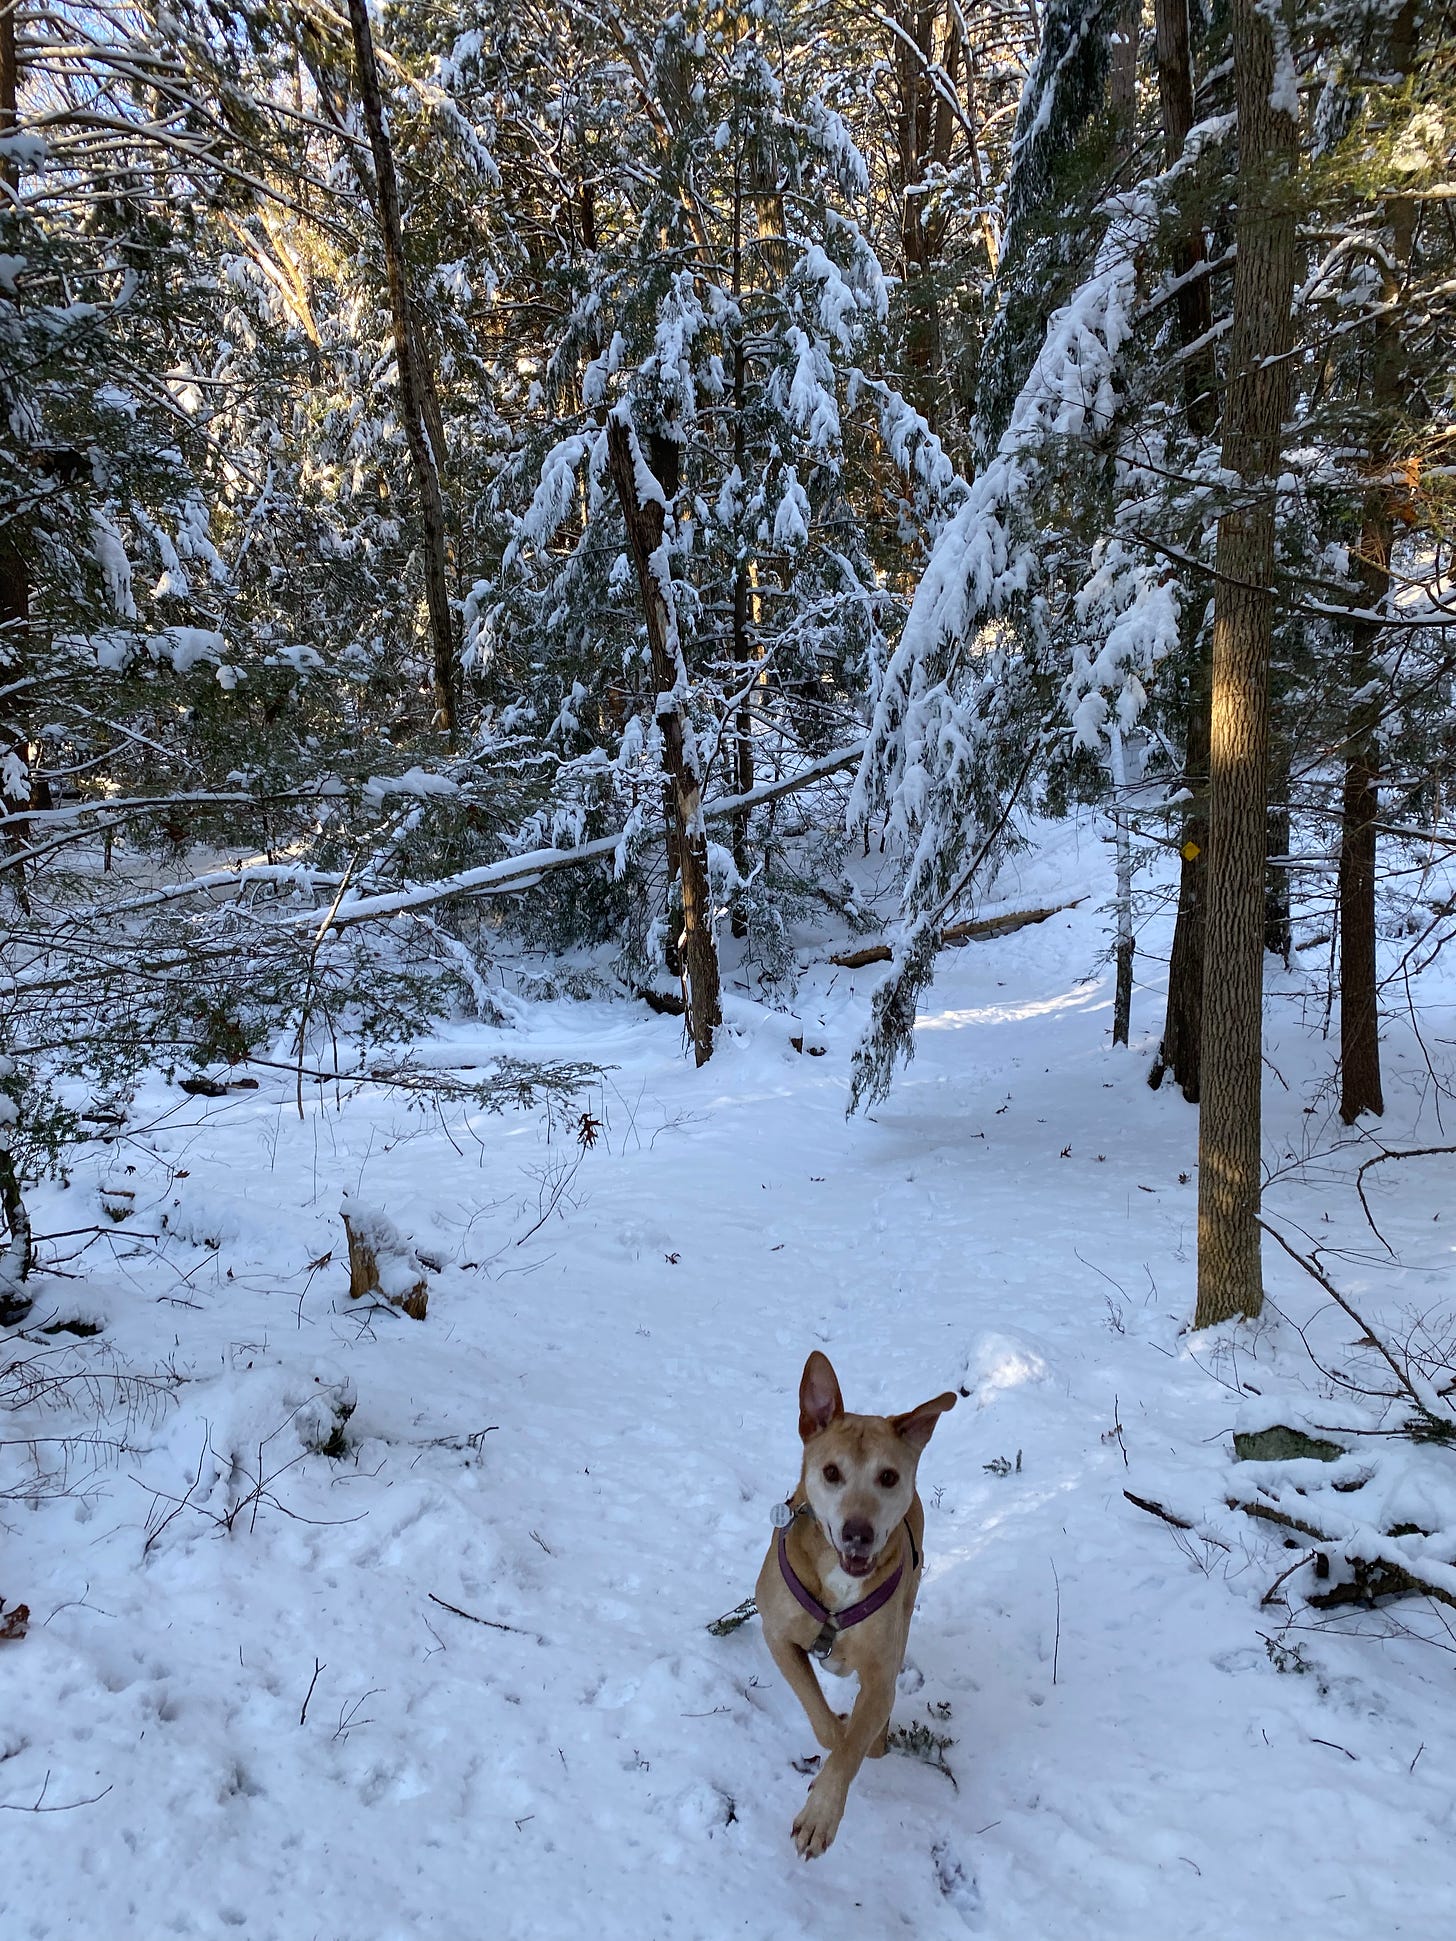 Nessa in mid-leap, ears flying,  bounding through a snowy forest.